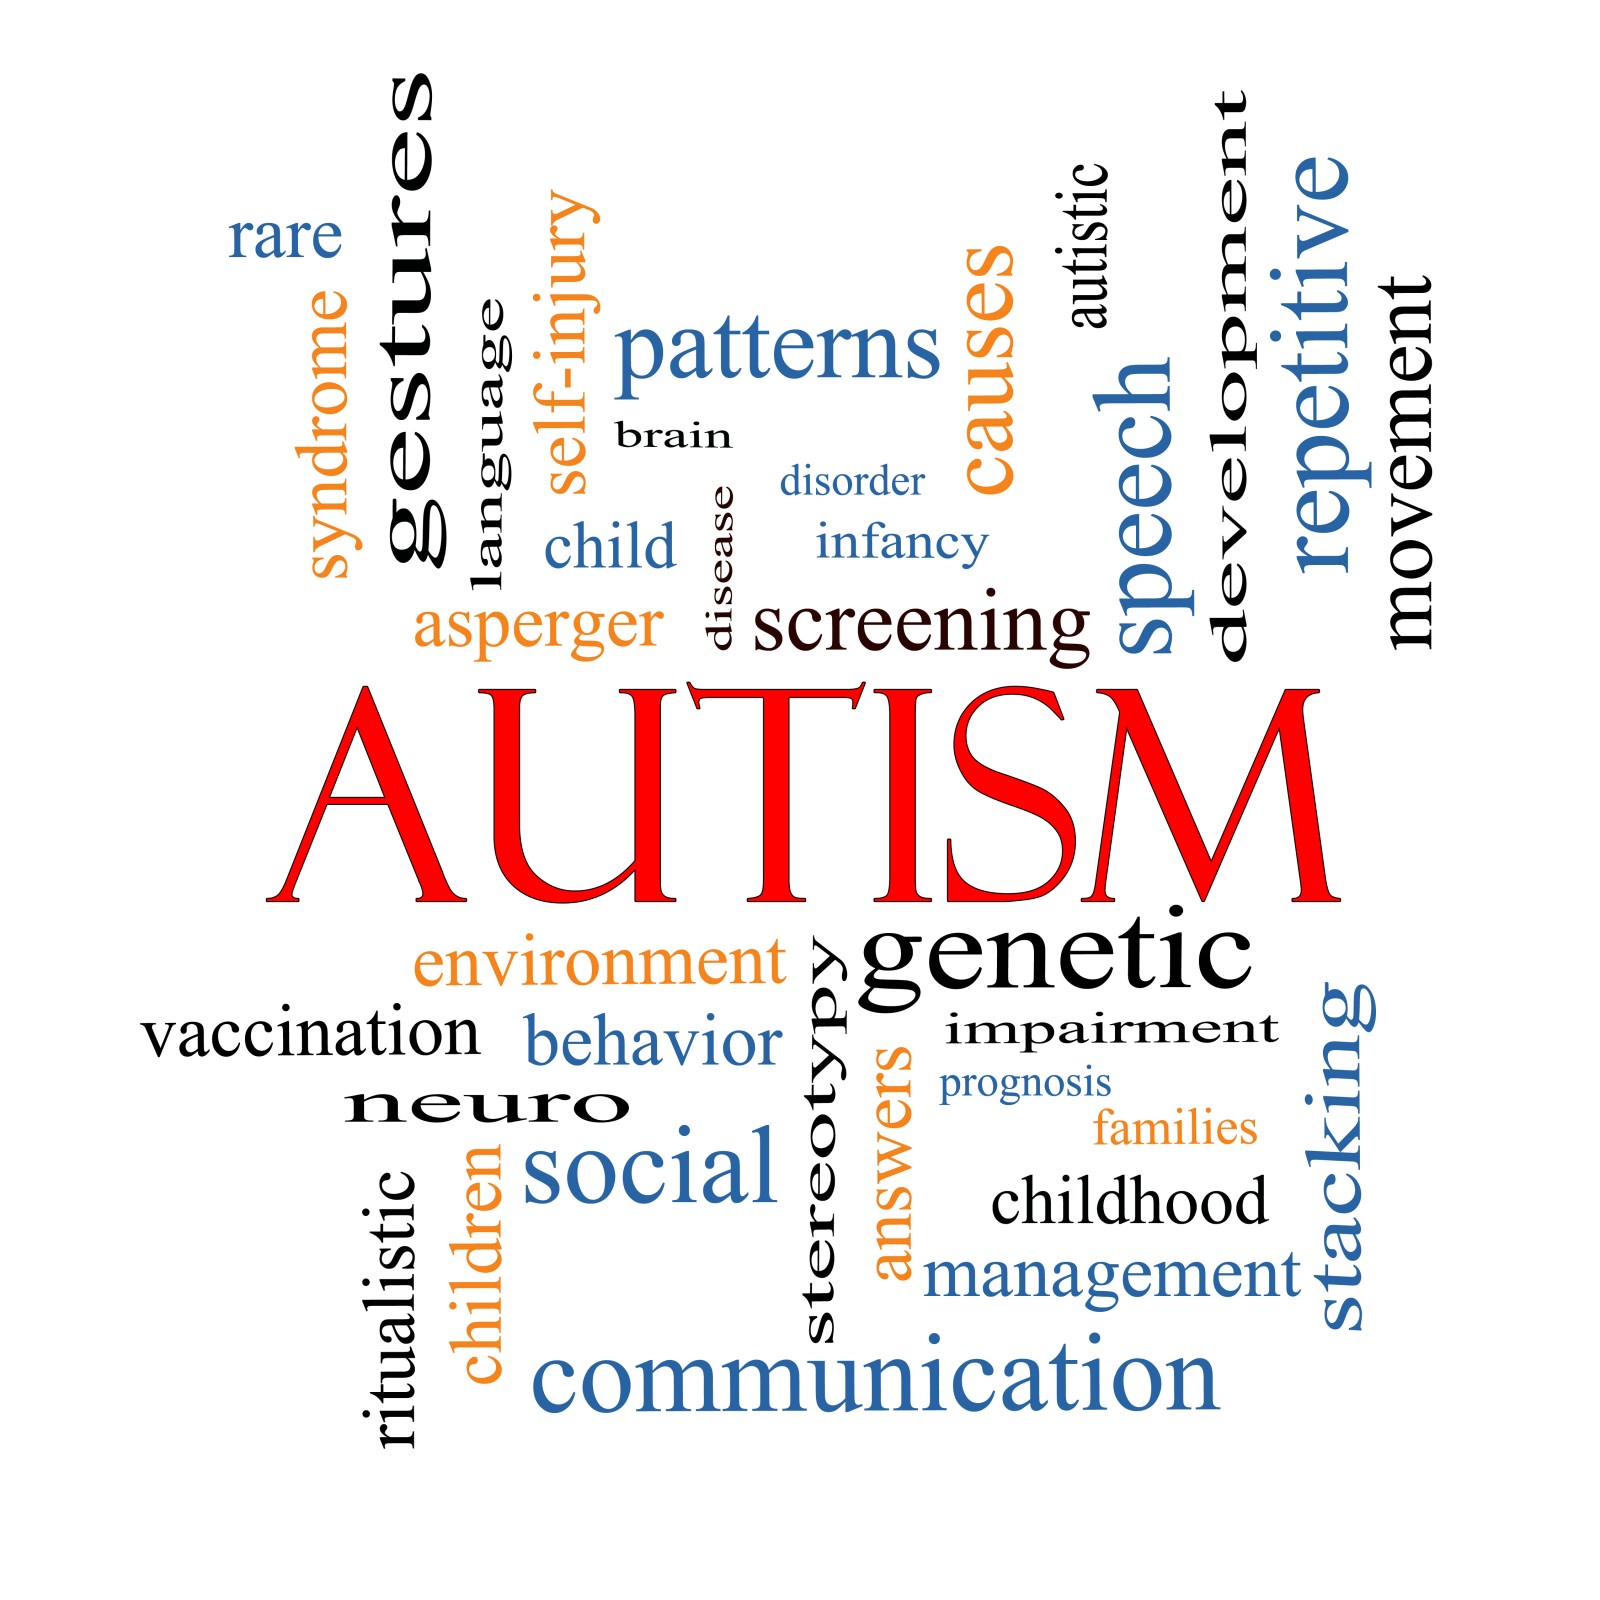 Autism Word Cloud Concept with great terms such as asperger, screening, neuro, social and more.